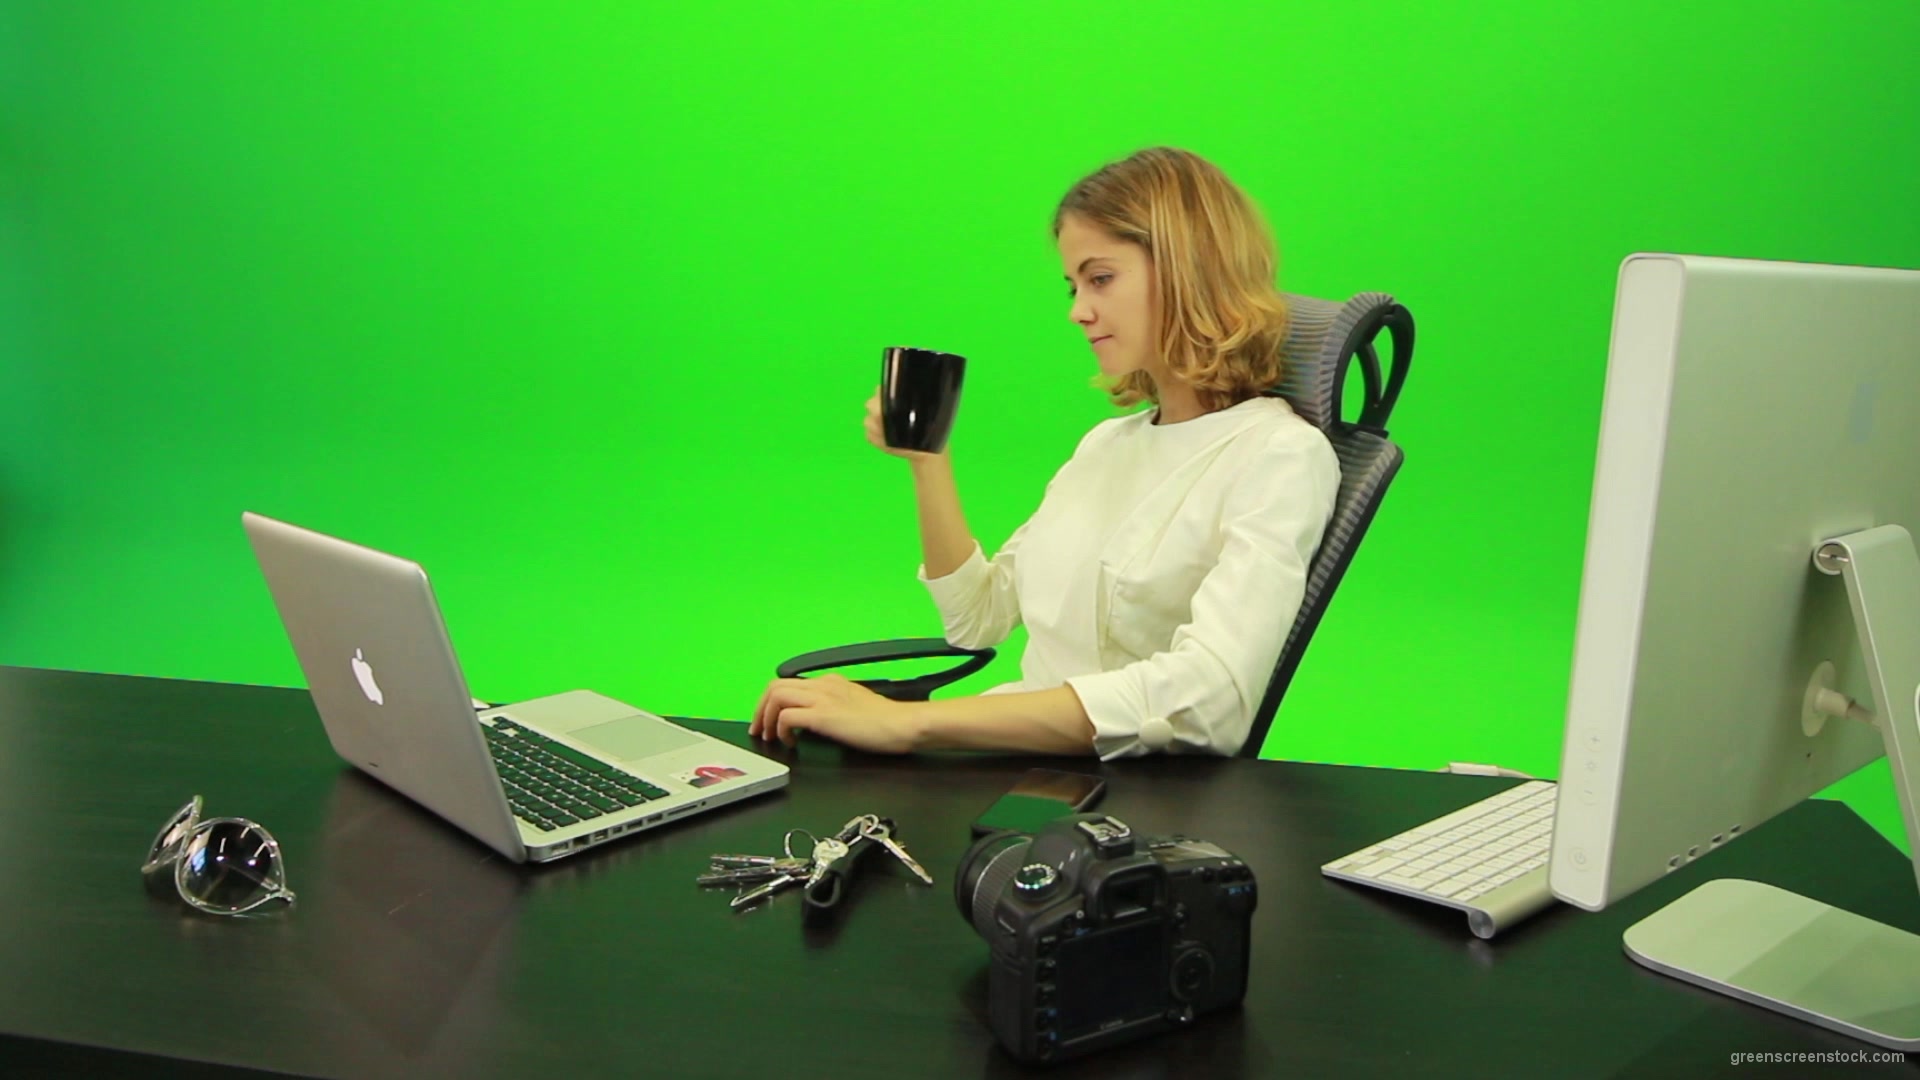 Business-Woman-Relaxing-and-Drinking-Coffee-after-Hard-Work-Green-Screen-Footage_005 Green Screen Stock